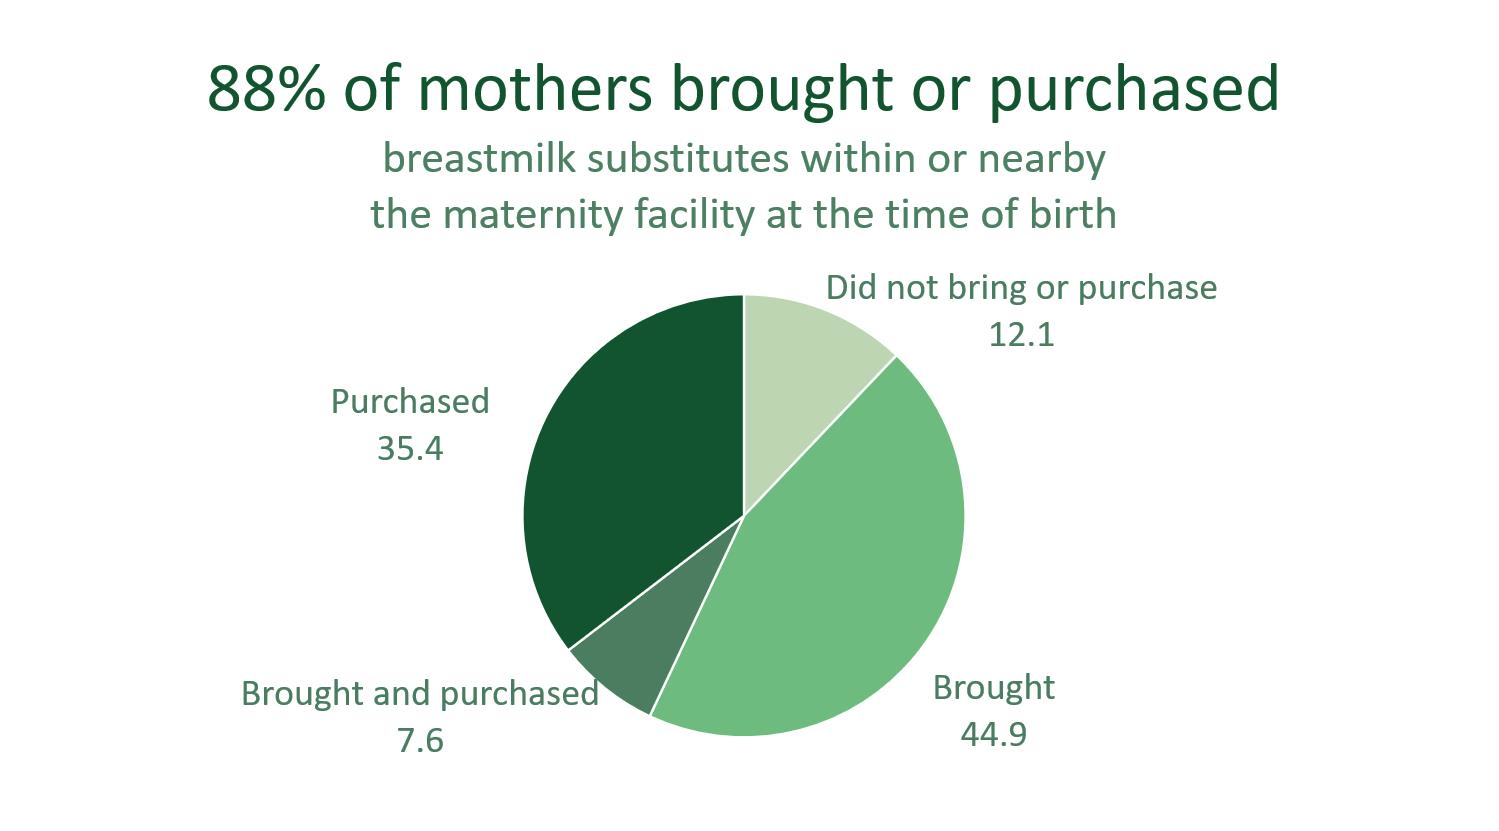 Nutrients Free Full-Text Implementation of the Code of Marketing of Breast-Milk Substitutes in Vietnam Marketing Practices by the Industry and Perceptions of Caregivers and Health Workers picture